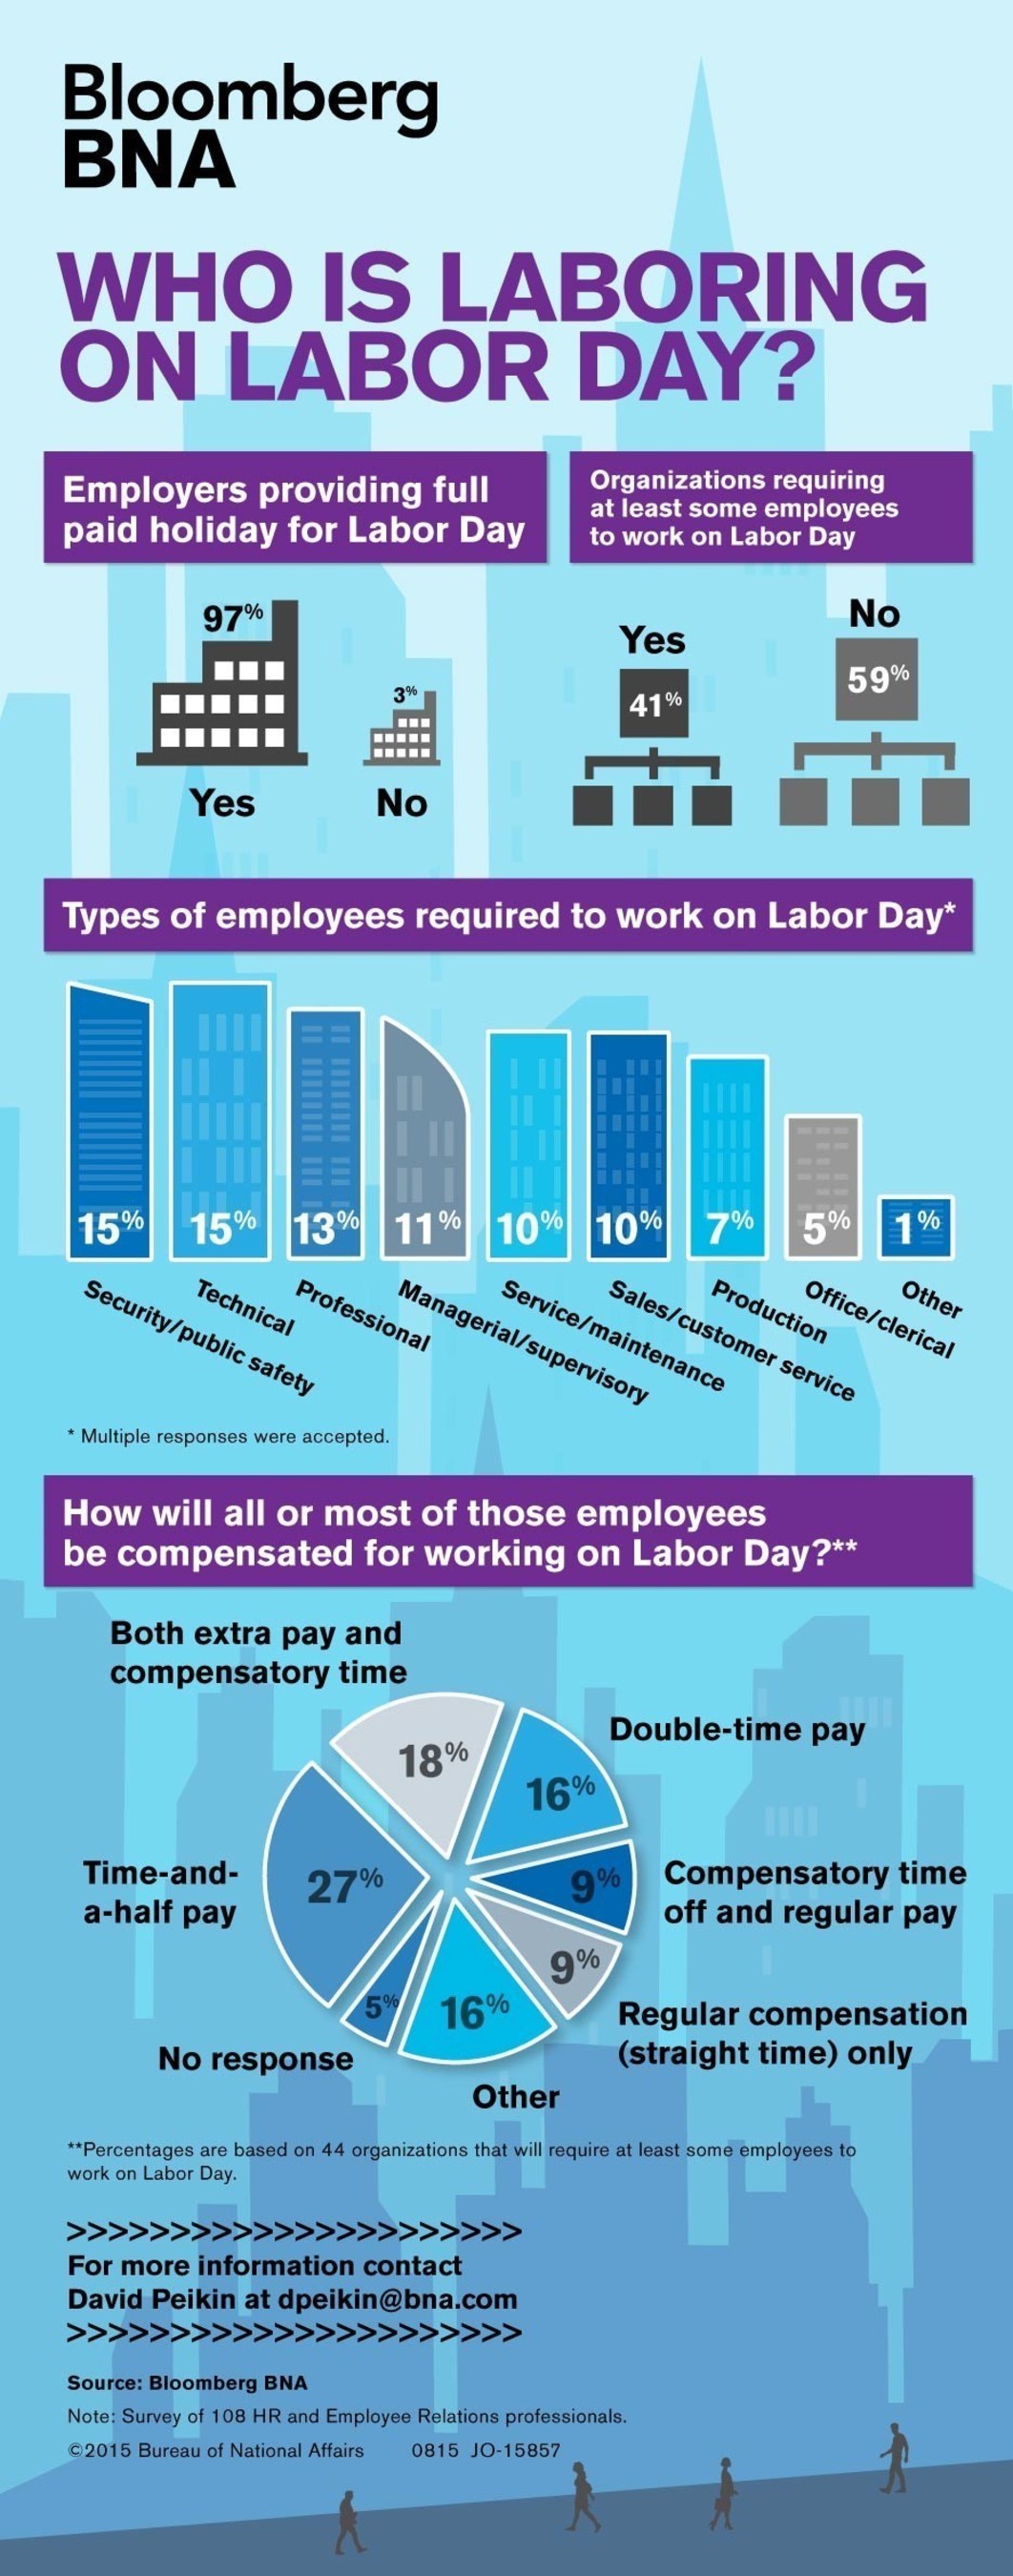 Labor Day Not a "Labor-Free" Day for All - Over 40% of Employers Will Require Some to Work On September 7, According to Bloomberg BNA Nationwide Survey